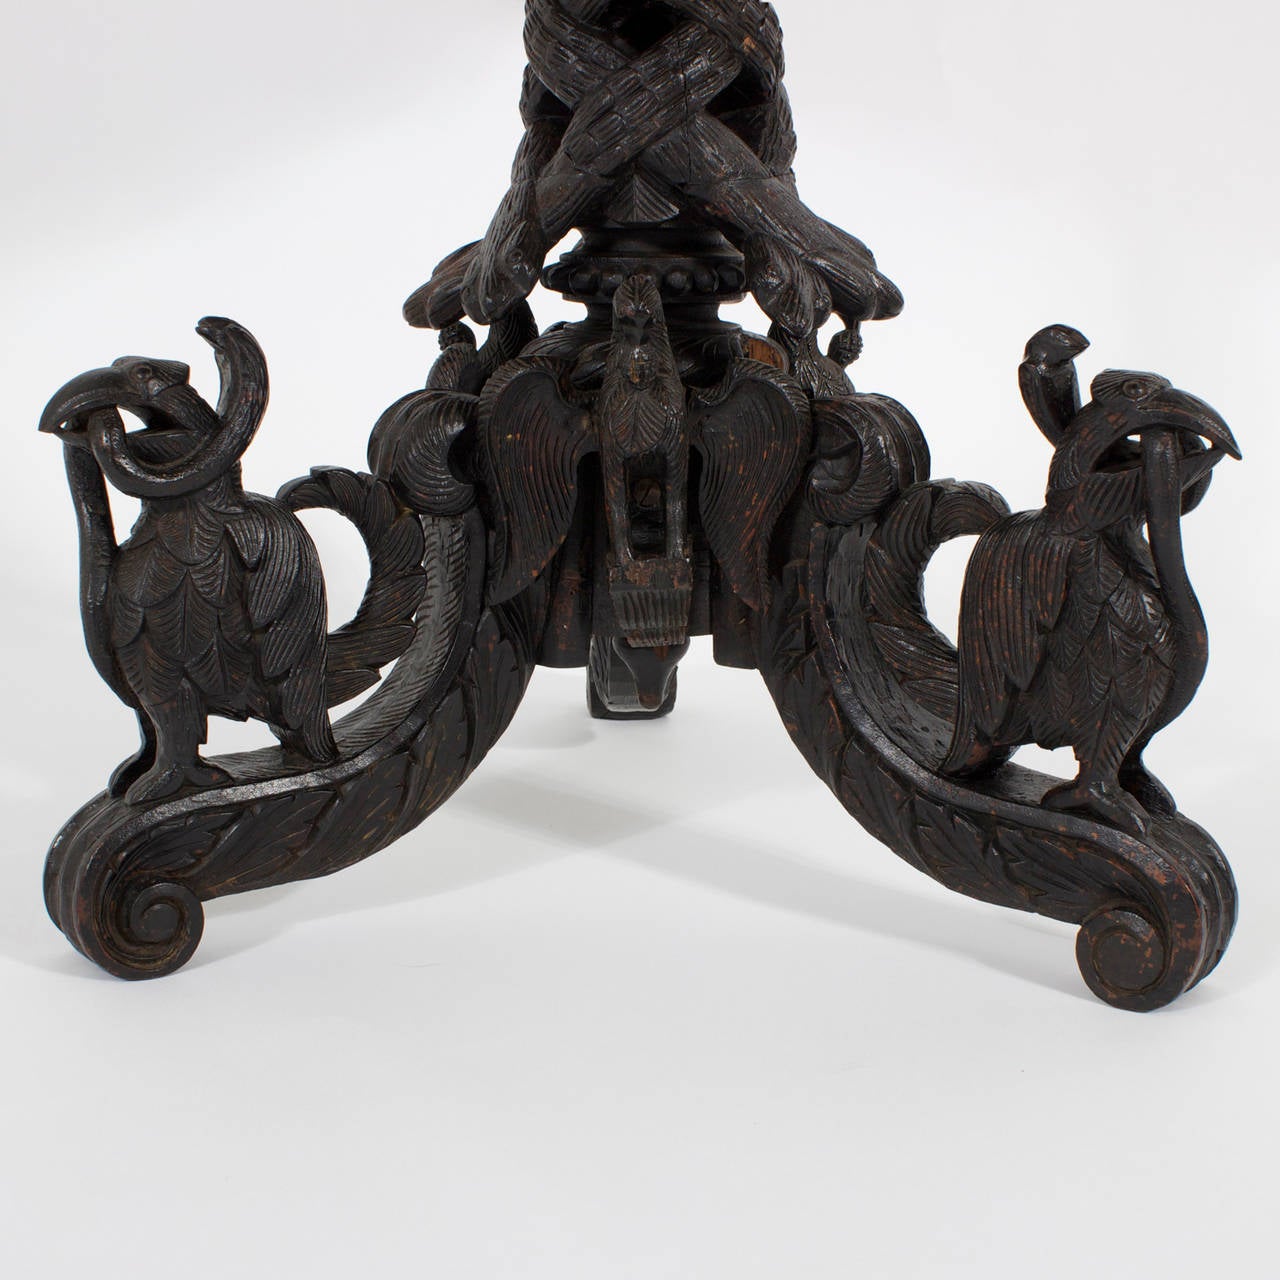 Impressive, antique Anglo-Indian occasional table with an elaborately carved three-leg pedestal base with scrolled feet, birds, snakes and foliage supporting a intricately carved circular top with foliage, birds, elephants and such, surrounded by a